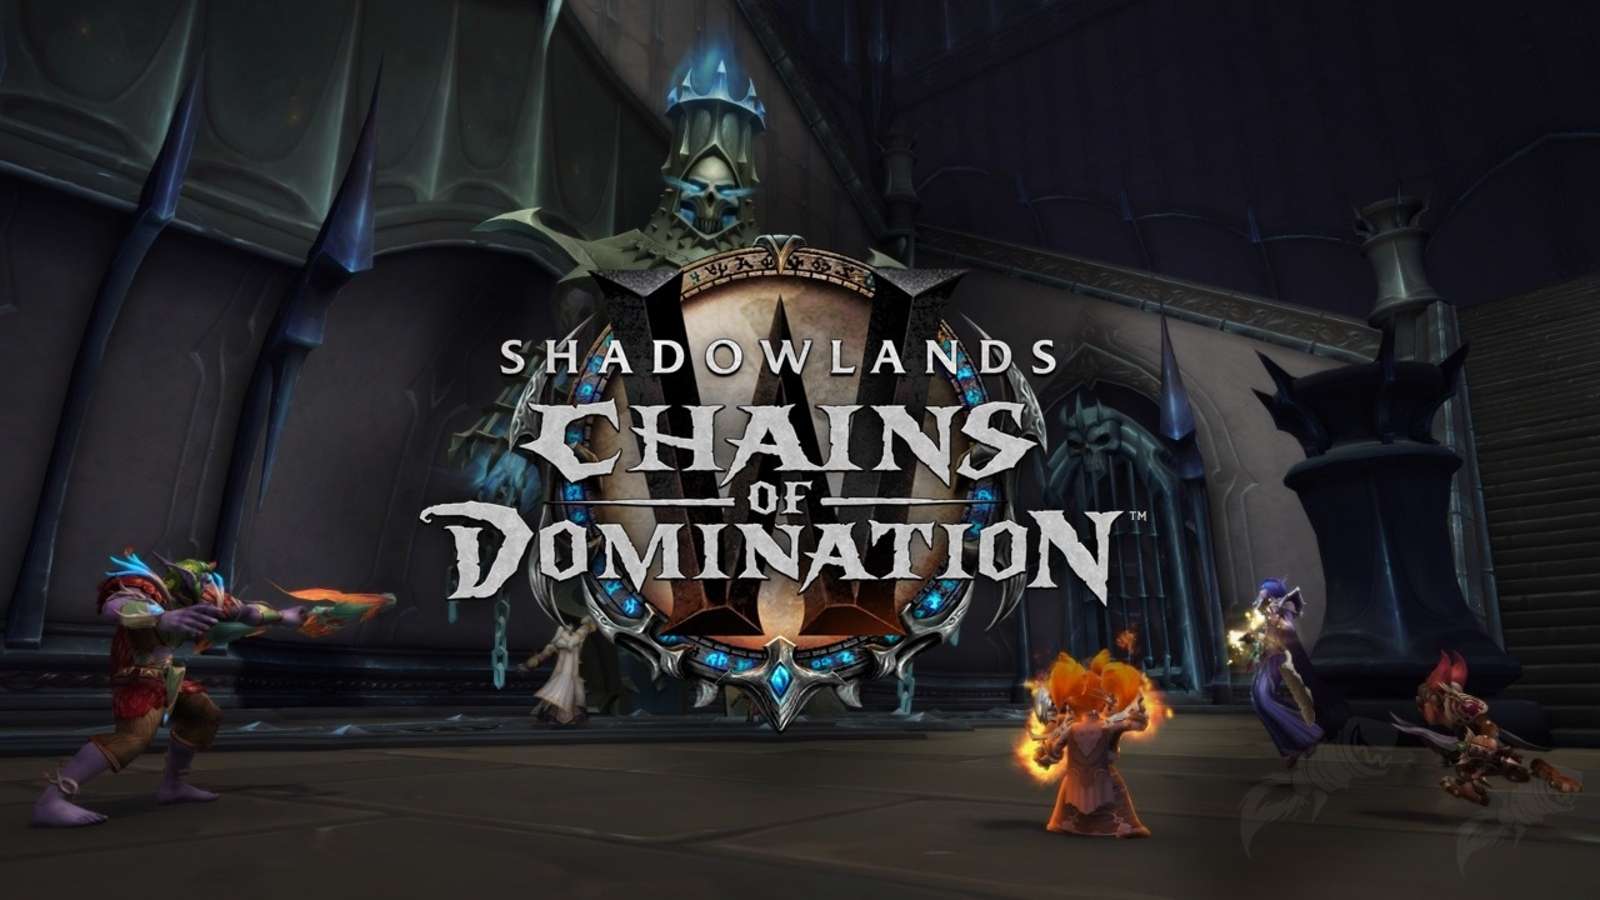 WoW_World_of_Warcraft_Shadowlands_BlizzConline_Leak_New_Content_Patch_Chains_of_Domination